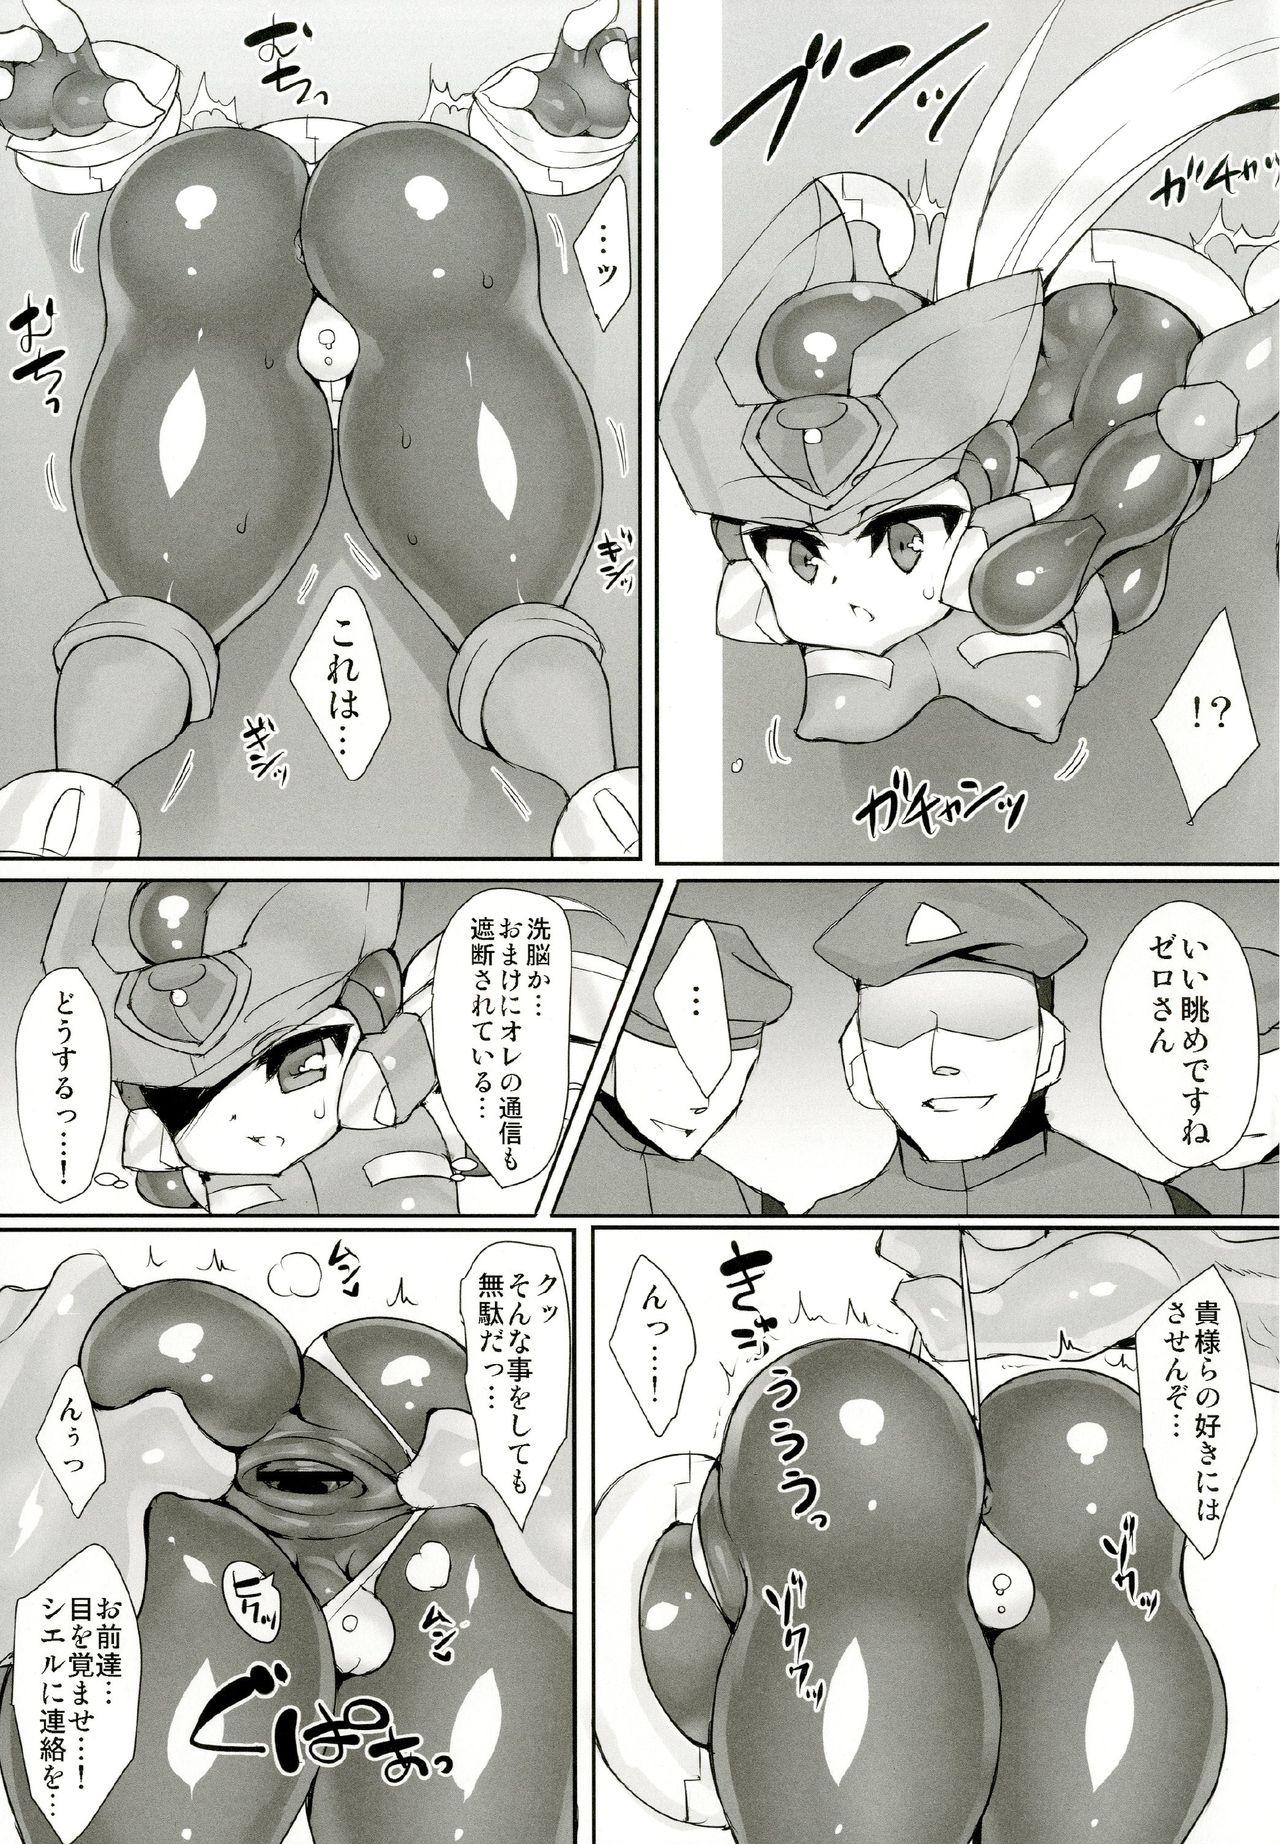 Culo Red Hero Does Not Yield - Megaman zero Ghetto - Page 7